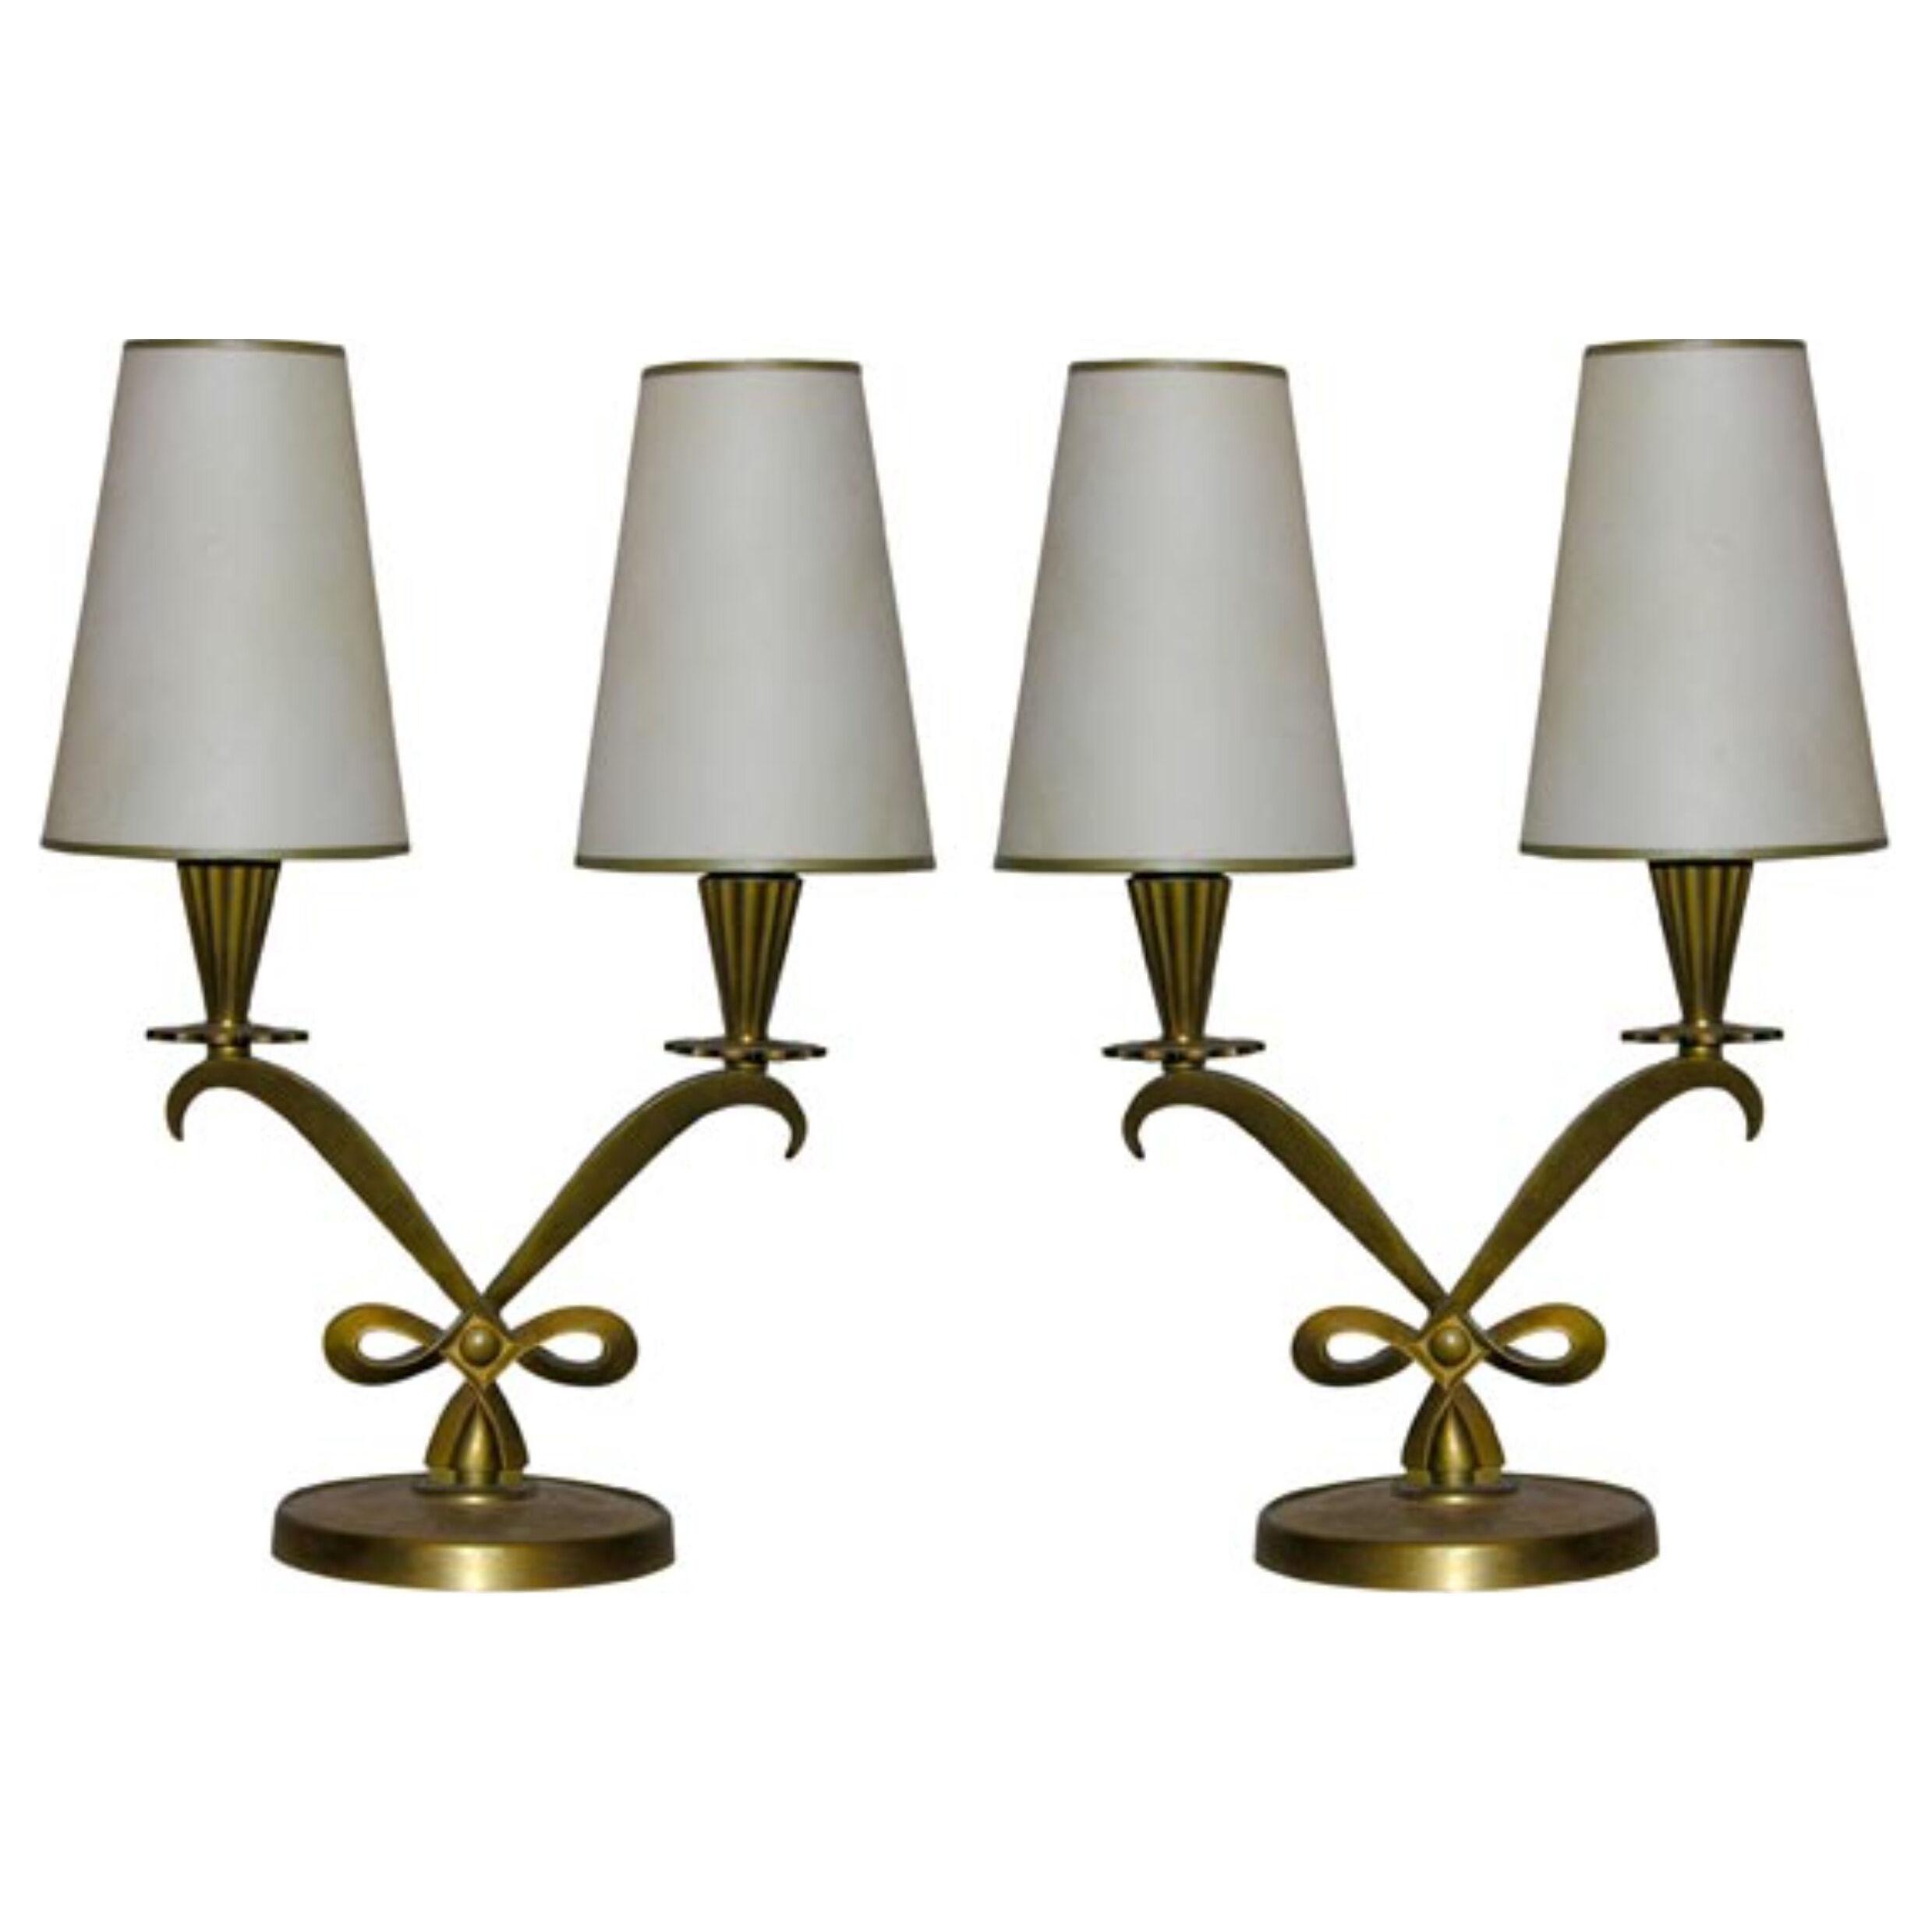 Pair of French Art Deco Table Lamps by Genet et Michon